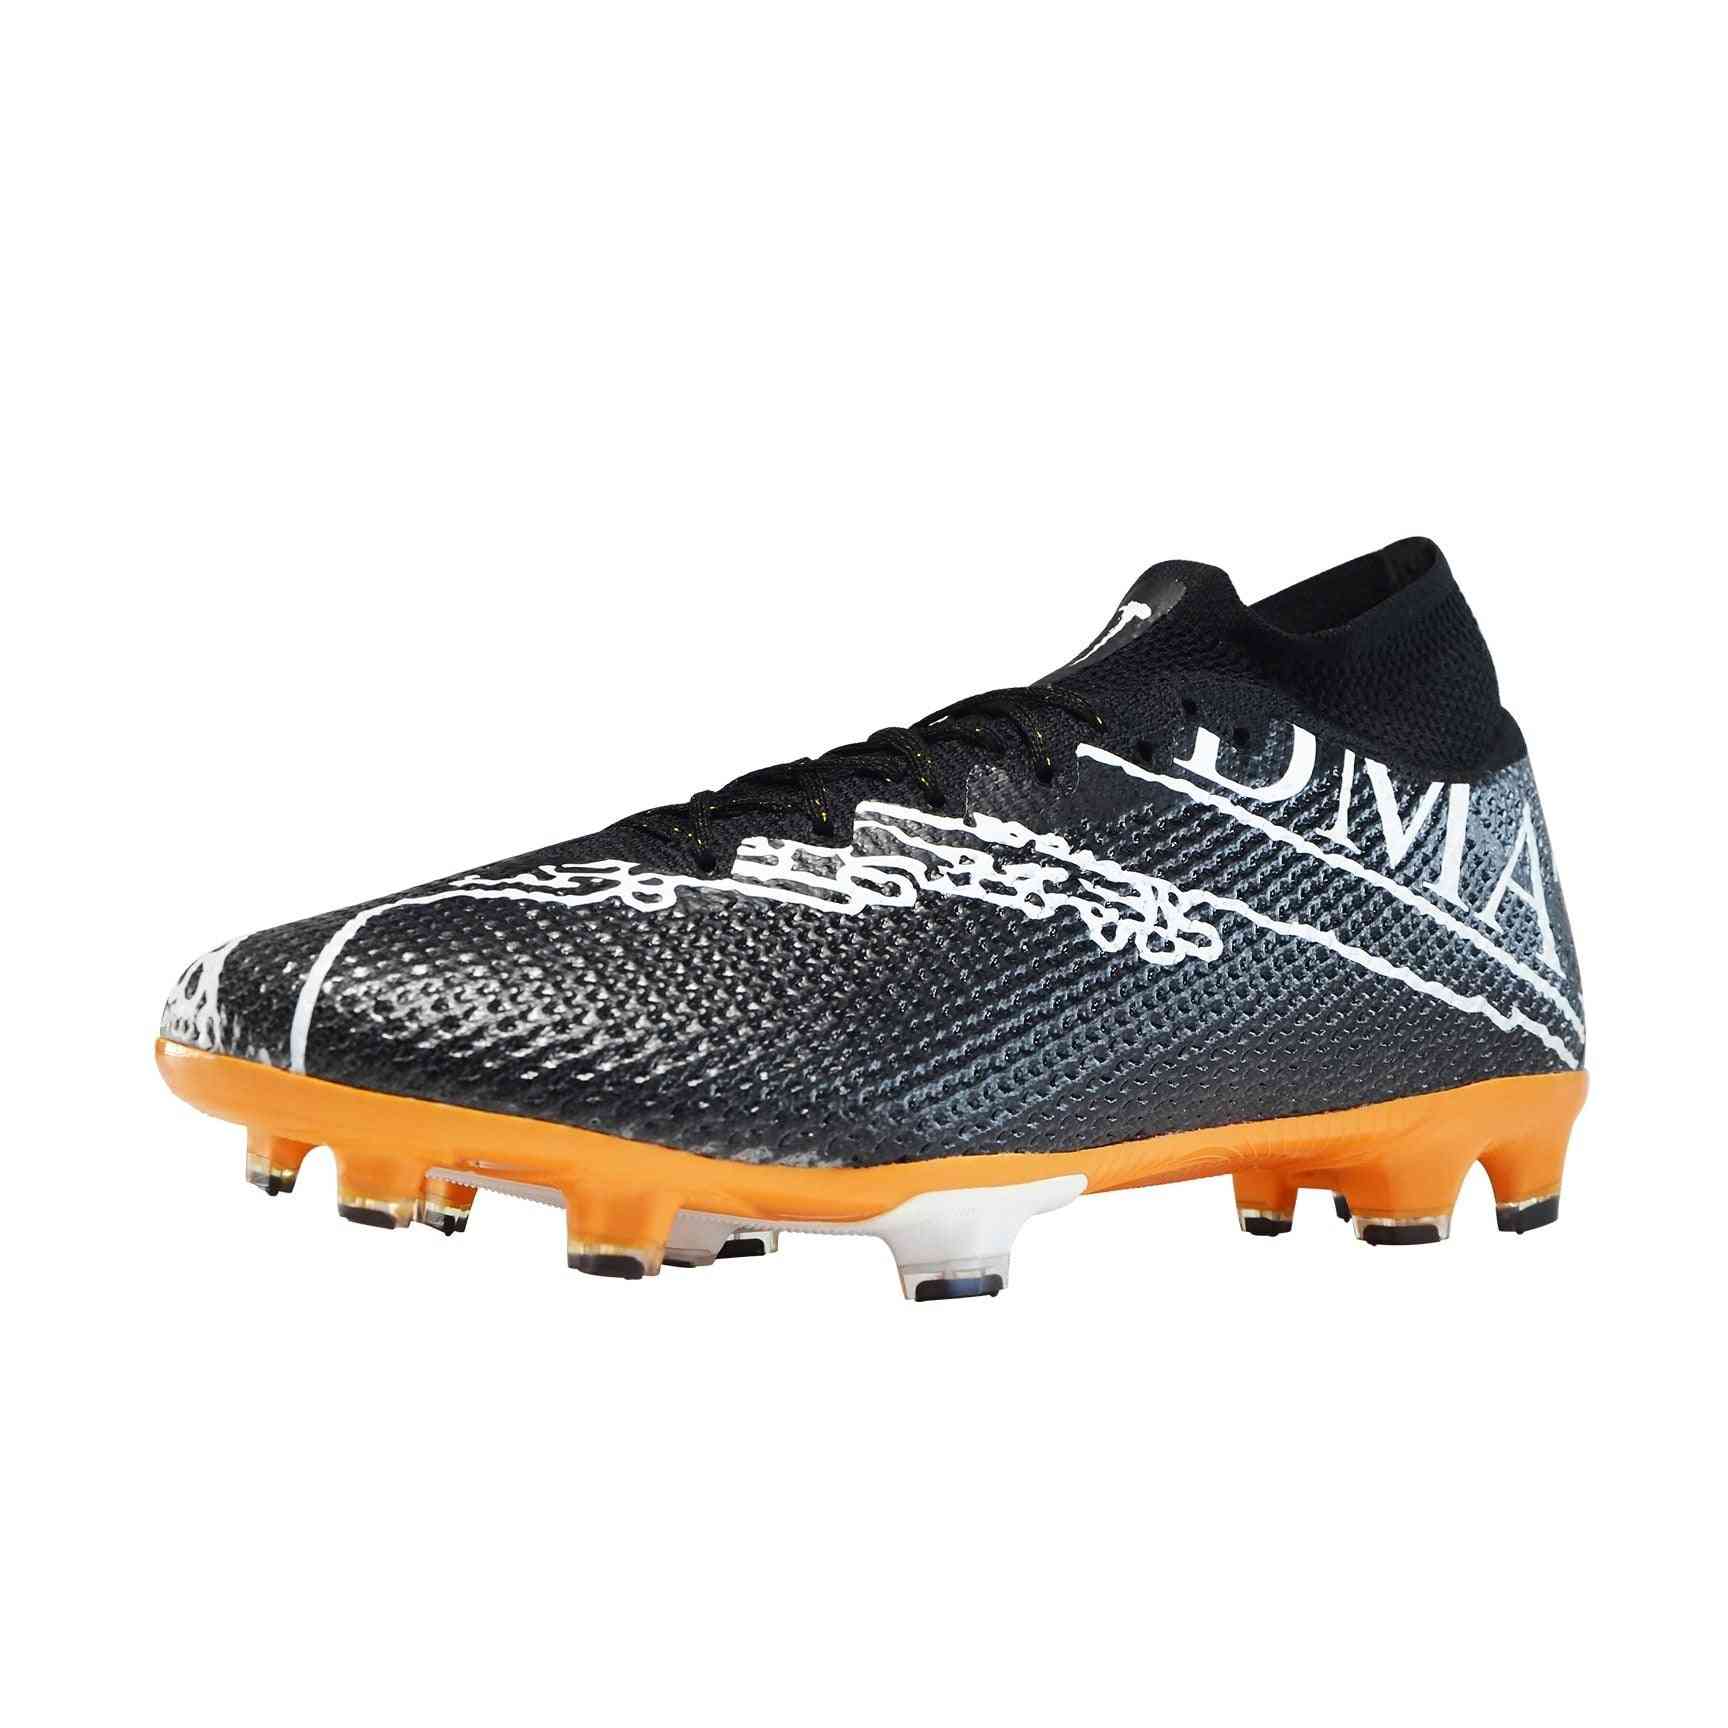 Soccer Shoes, Adult Classic Football Shoe, Waterproof Boot